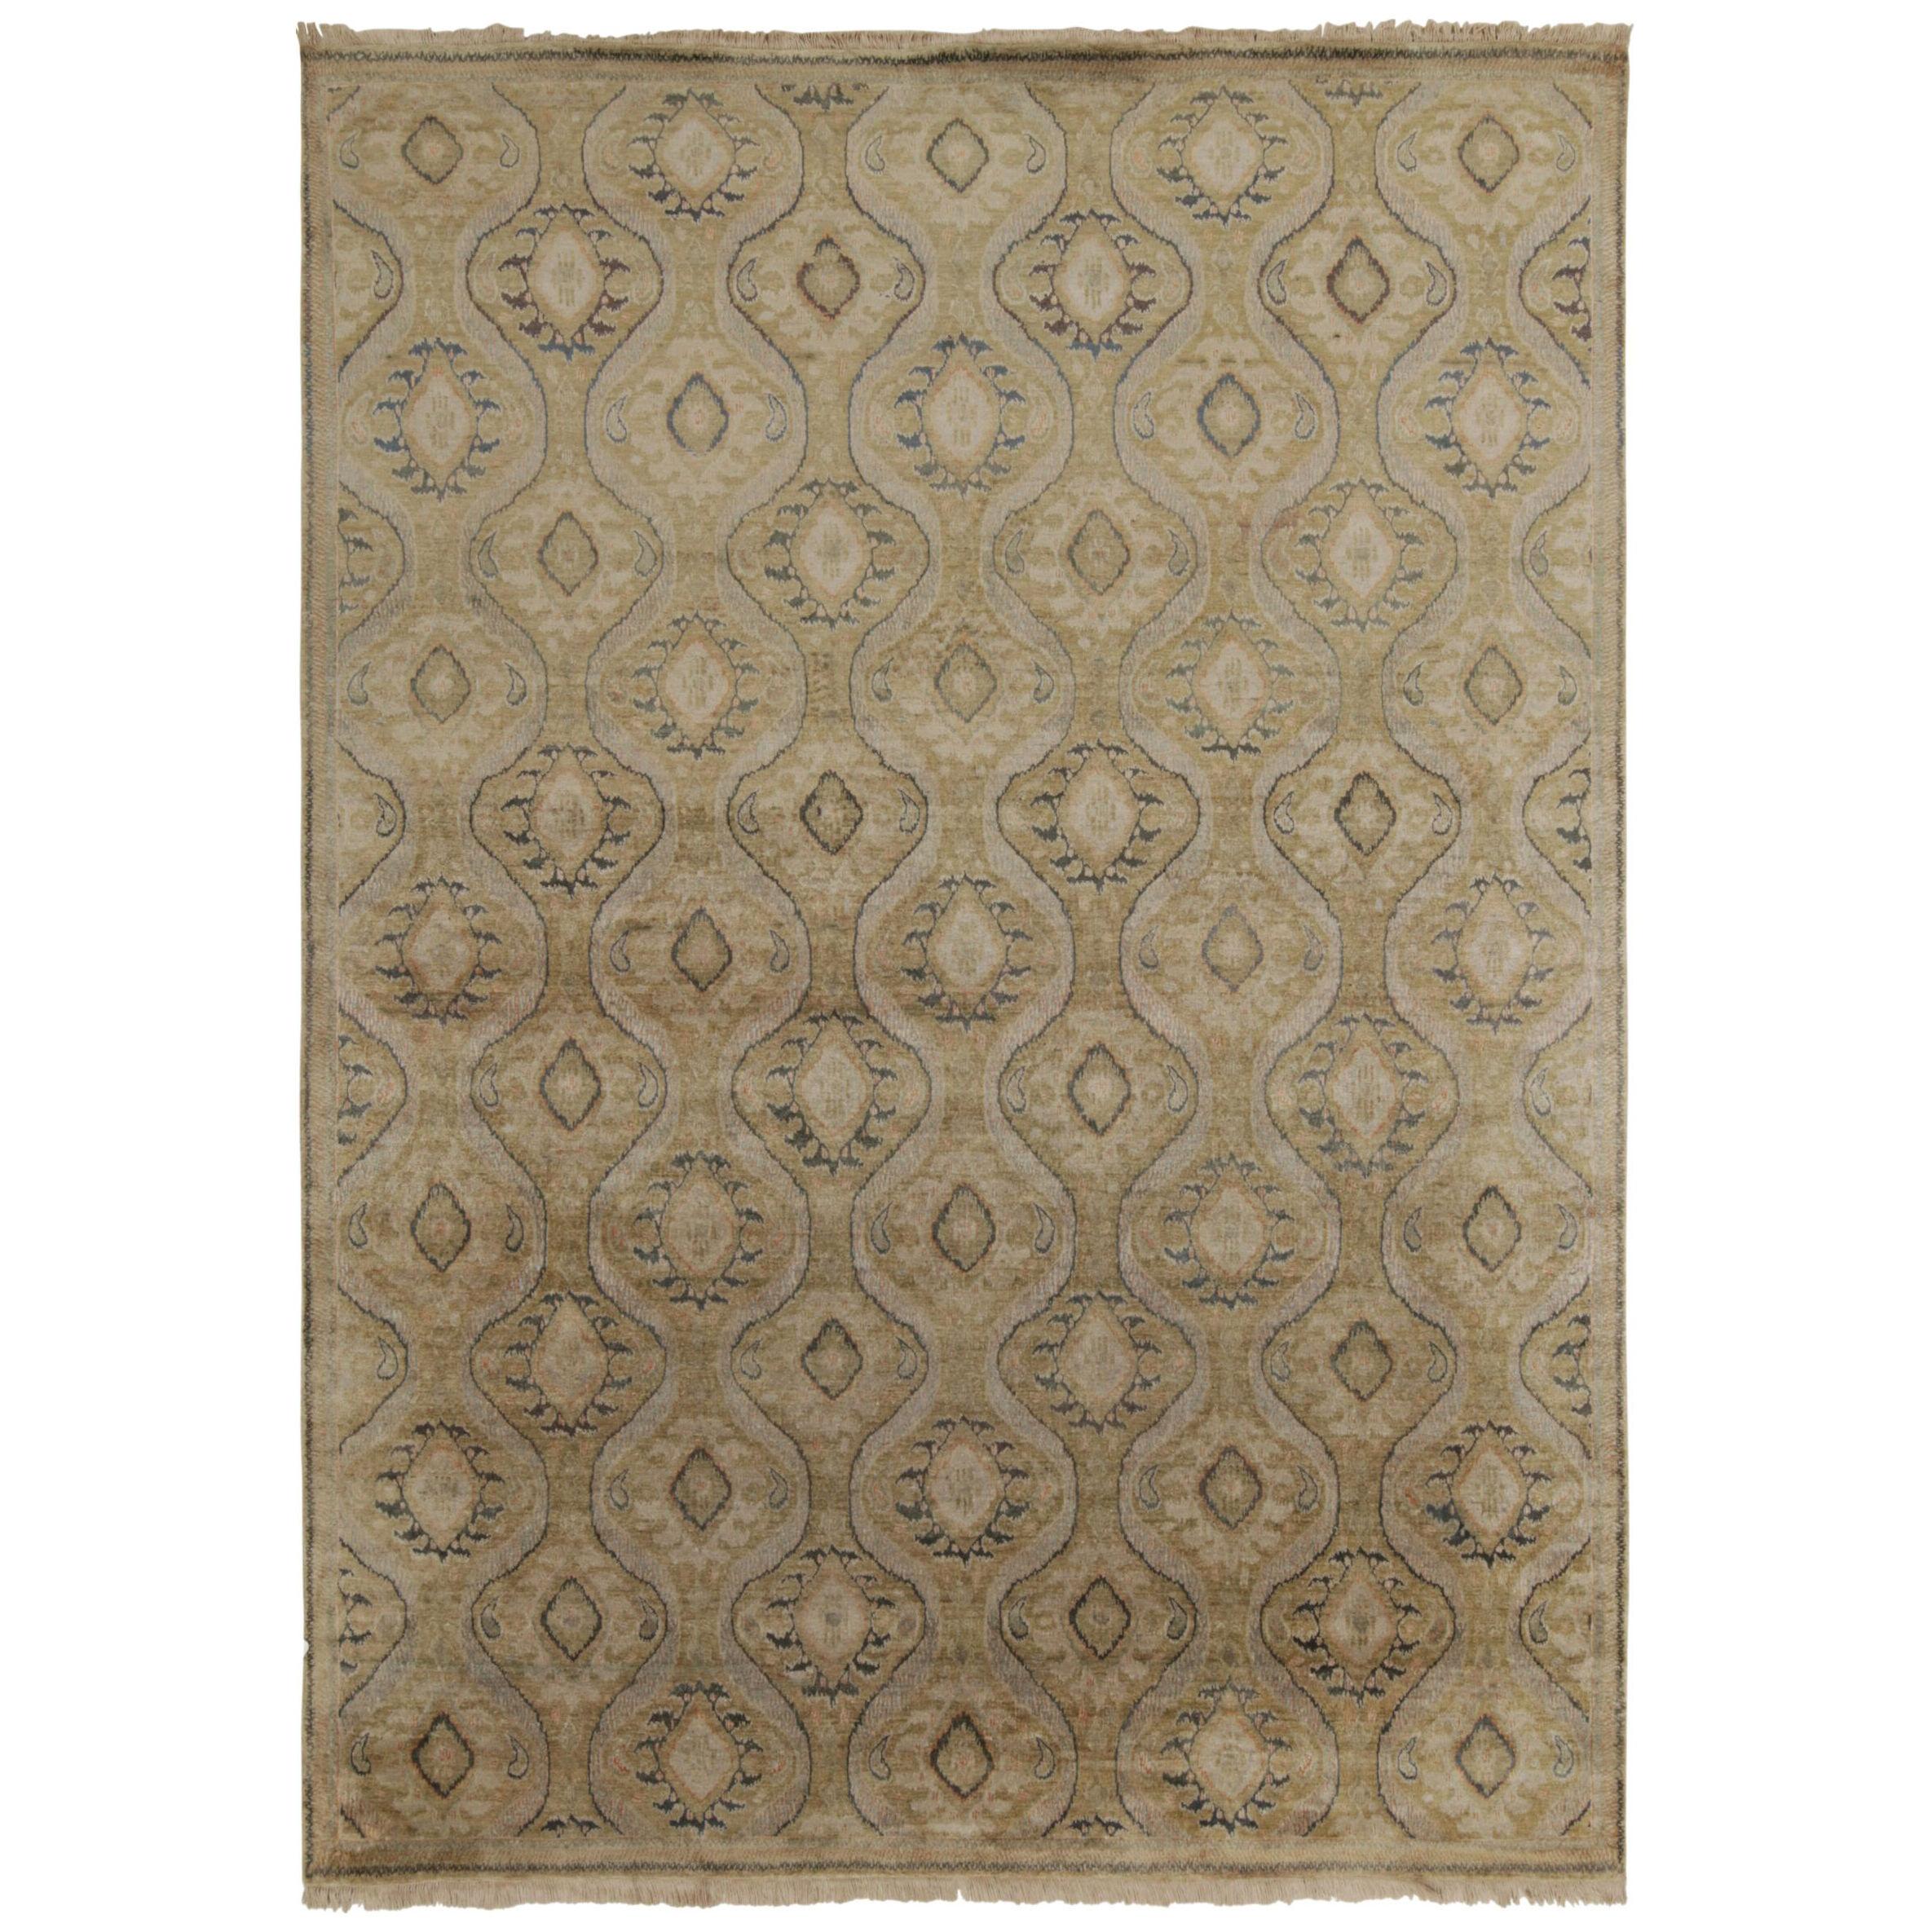 Rug & Kilim’s Classic Style Rug in Green and Beige-Brown Ikats Patterns